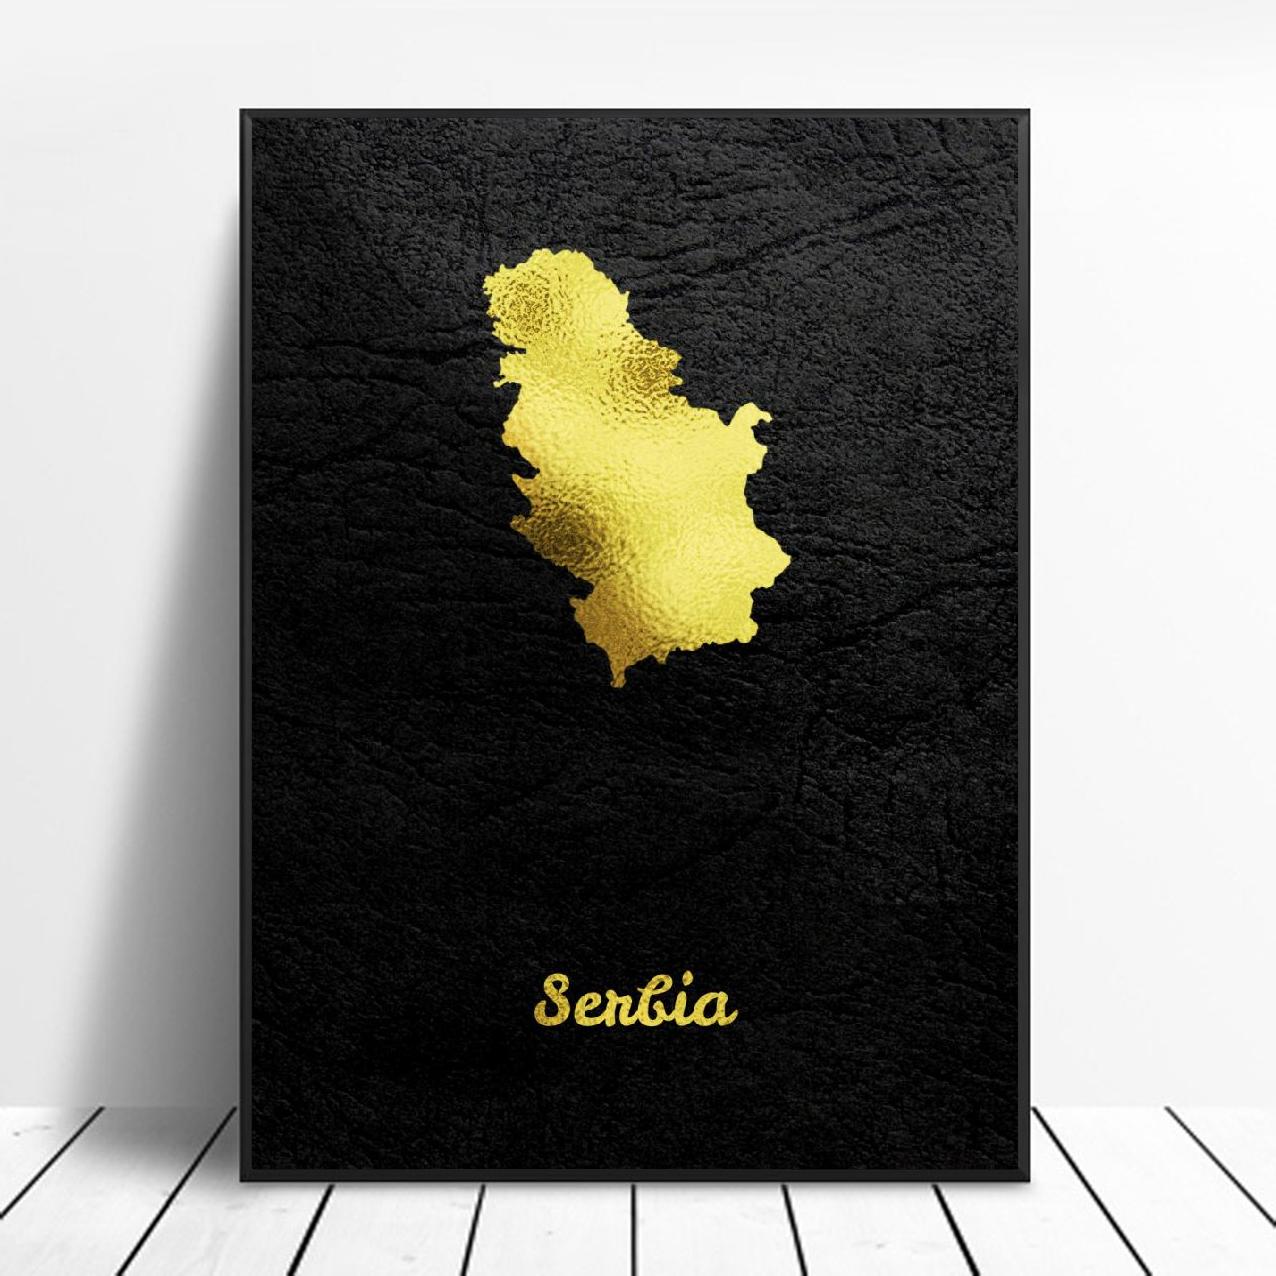 Serbia Golden Map Canvas Painting Modern Poster